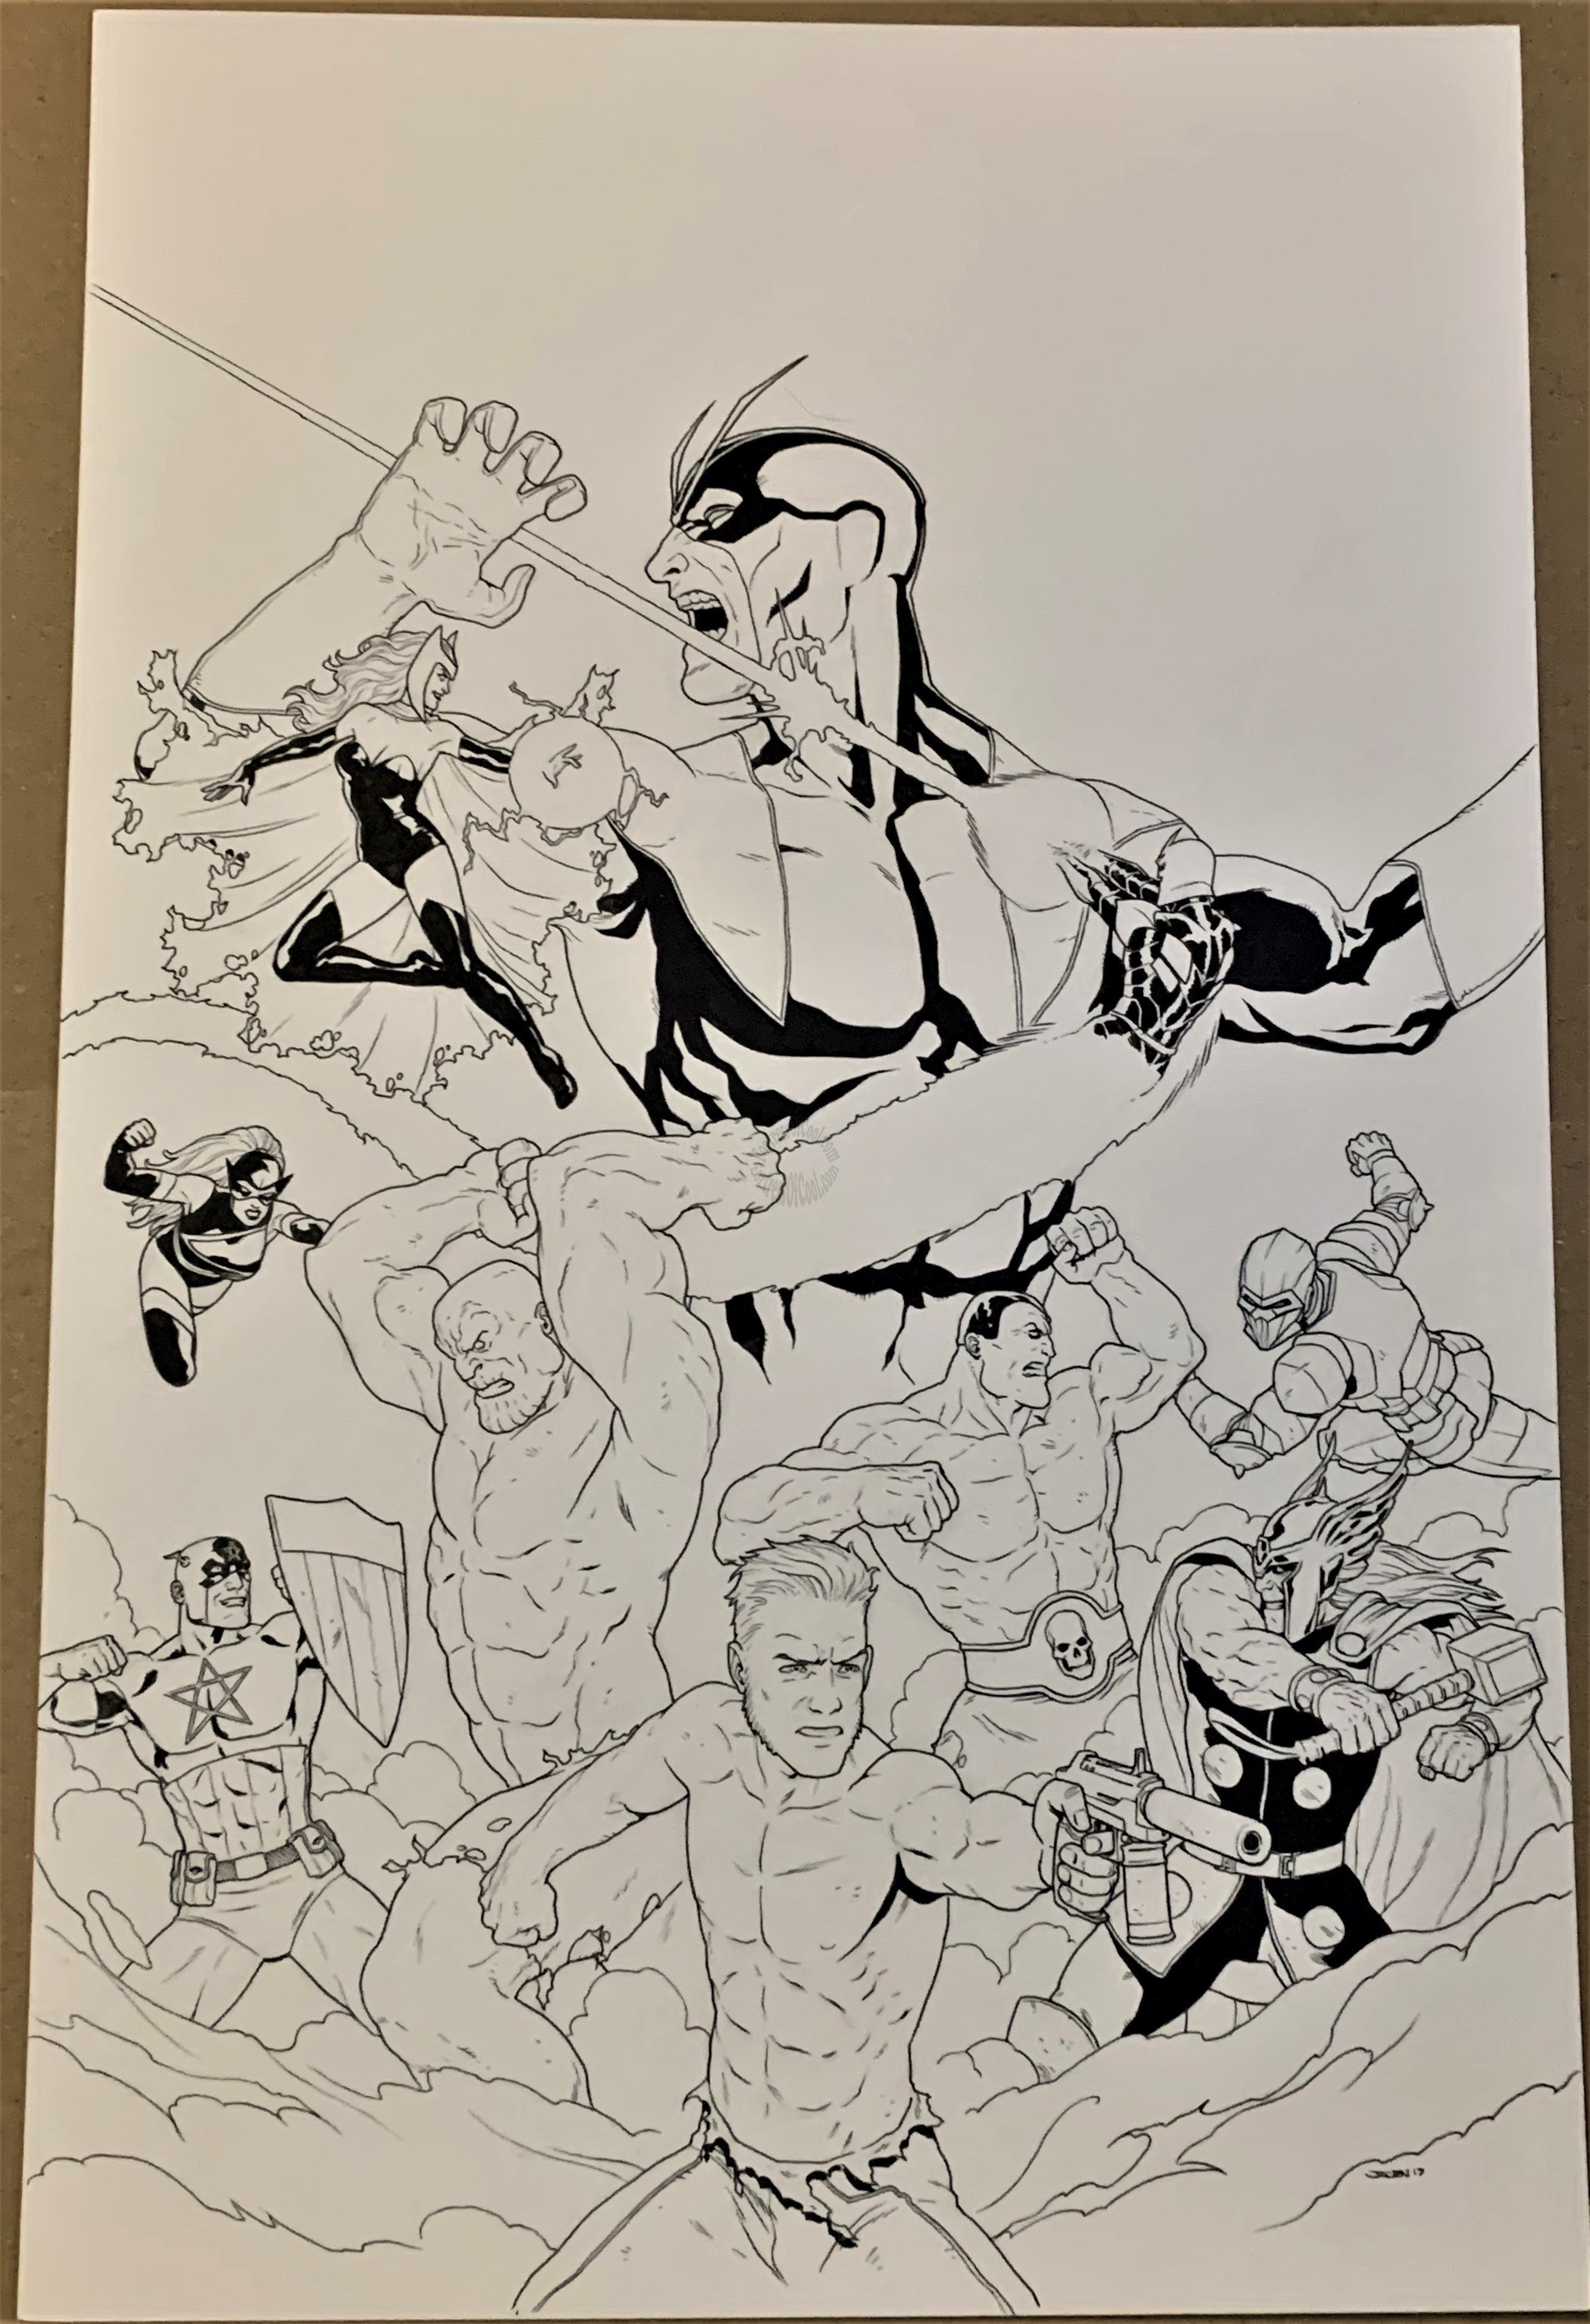 GUARDIANS OF THE GALAXY #19 BURROWS BEST BENDIS MOMENTS VARIANT COVER ORIGINAL ART